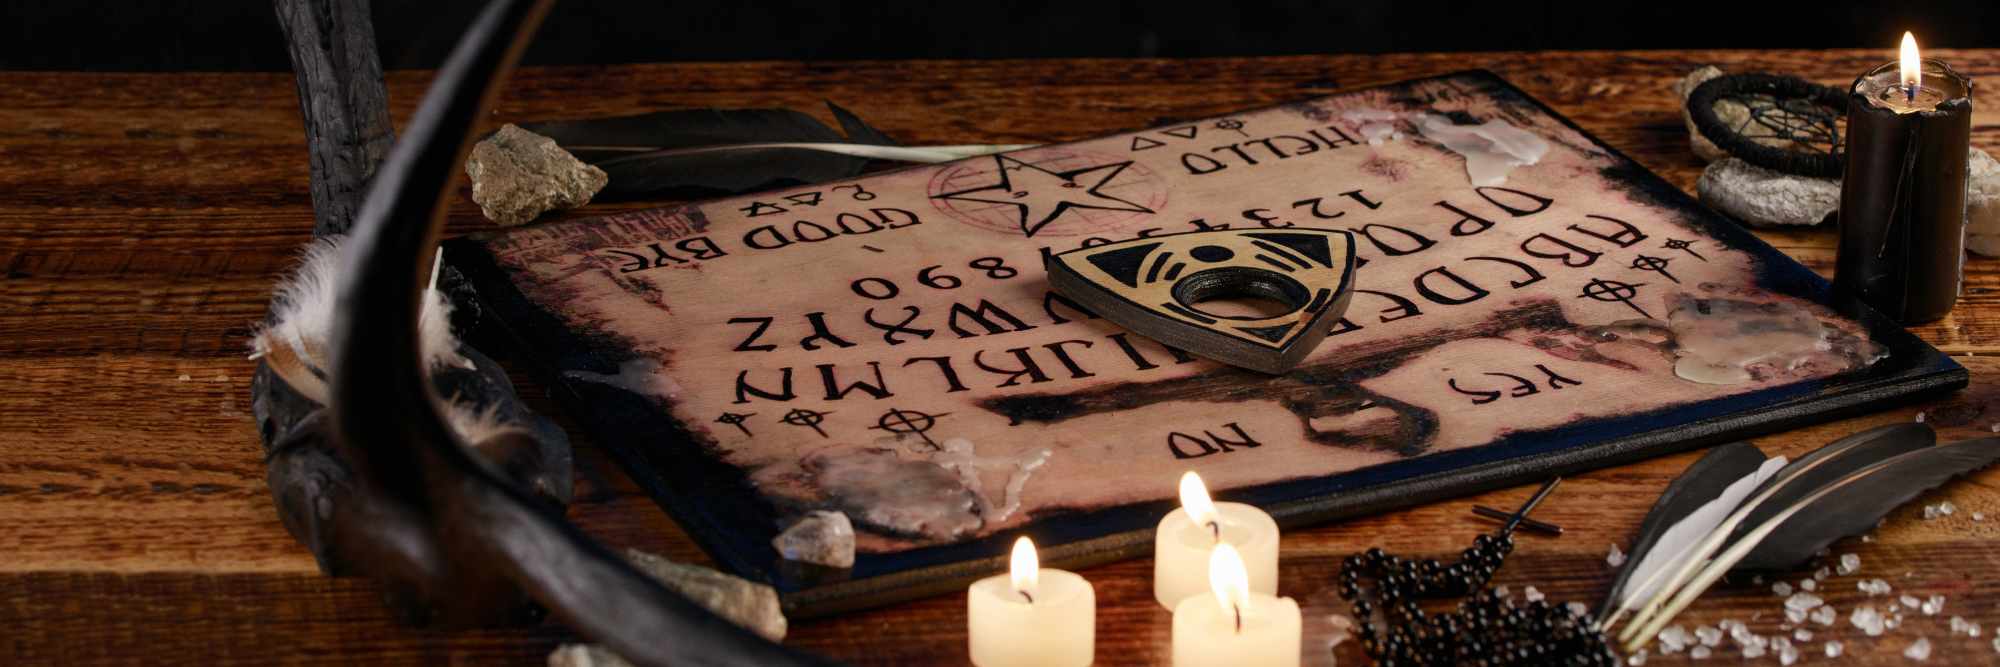 Witchcraft Printables - Morgana Magick Spell